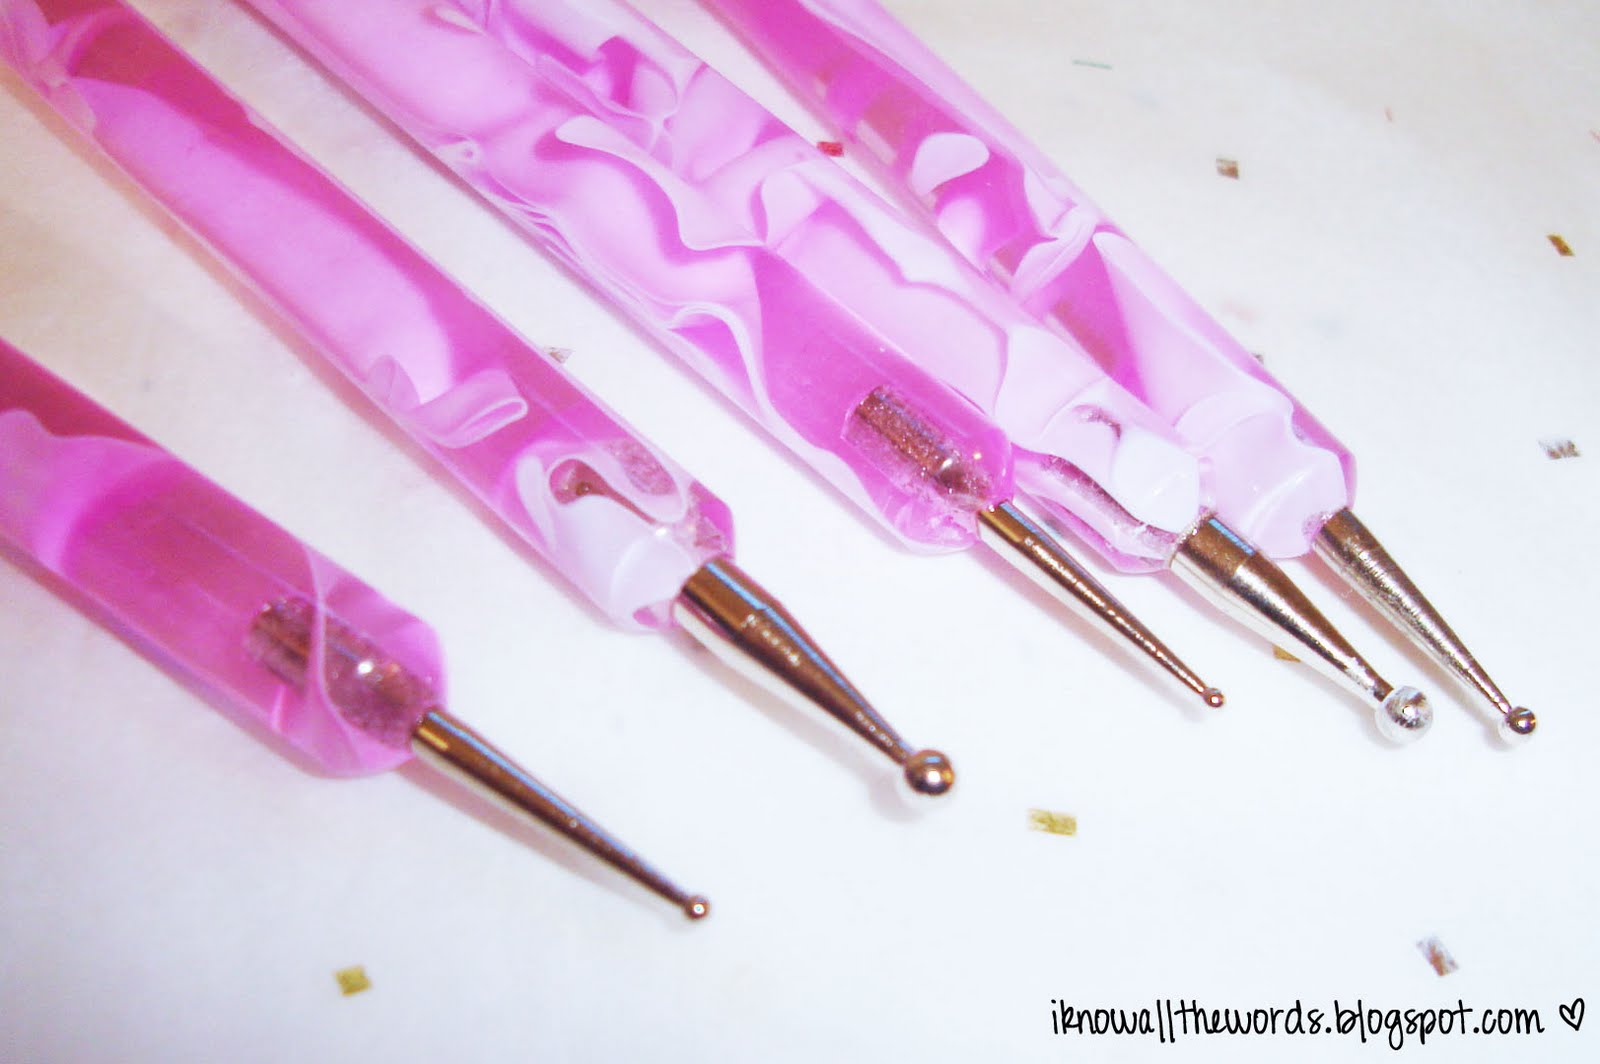 The set includes 5 double ended dotting tools, giving you 10 different sizes